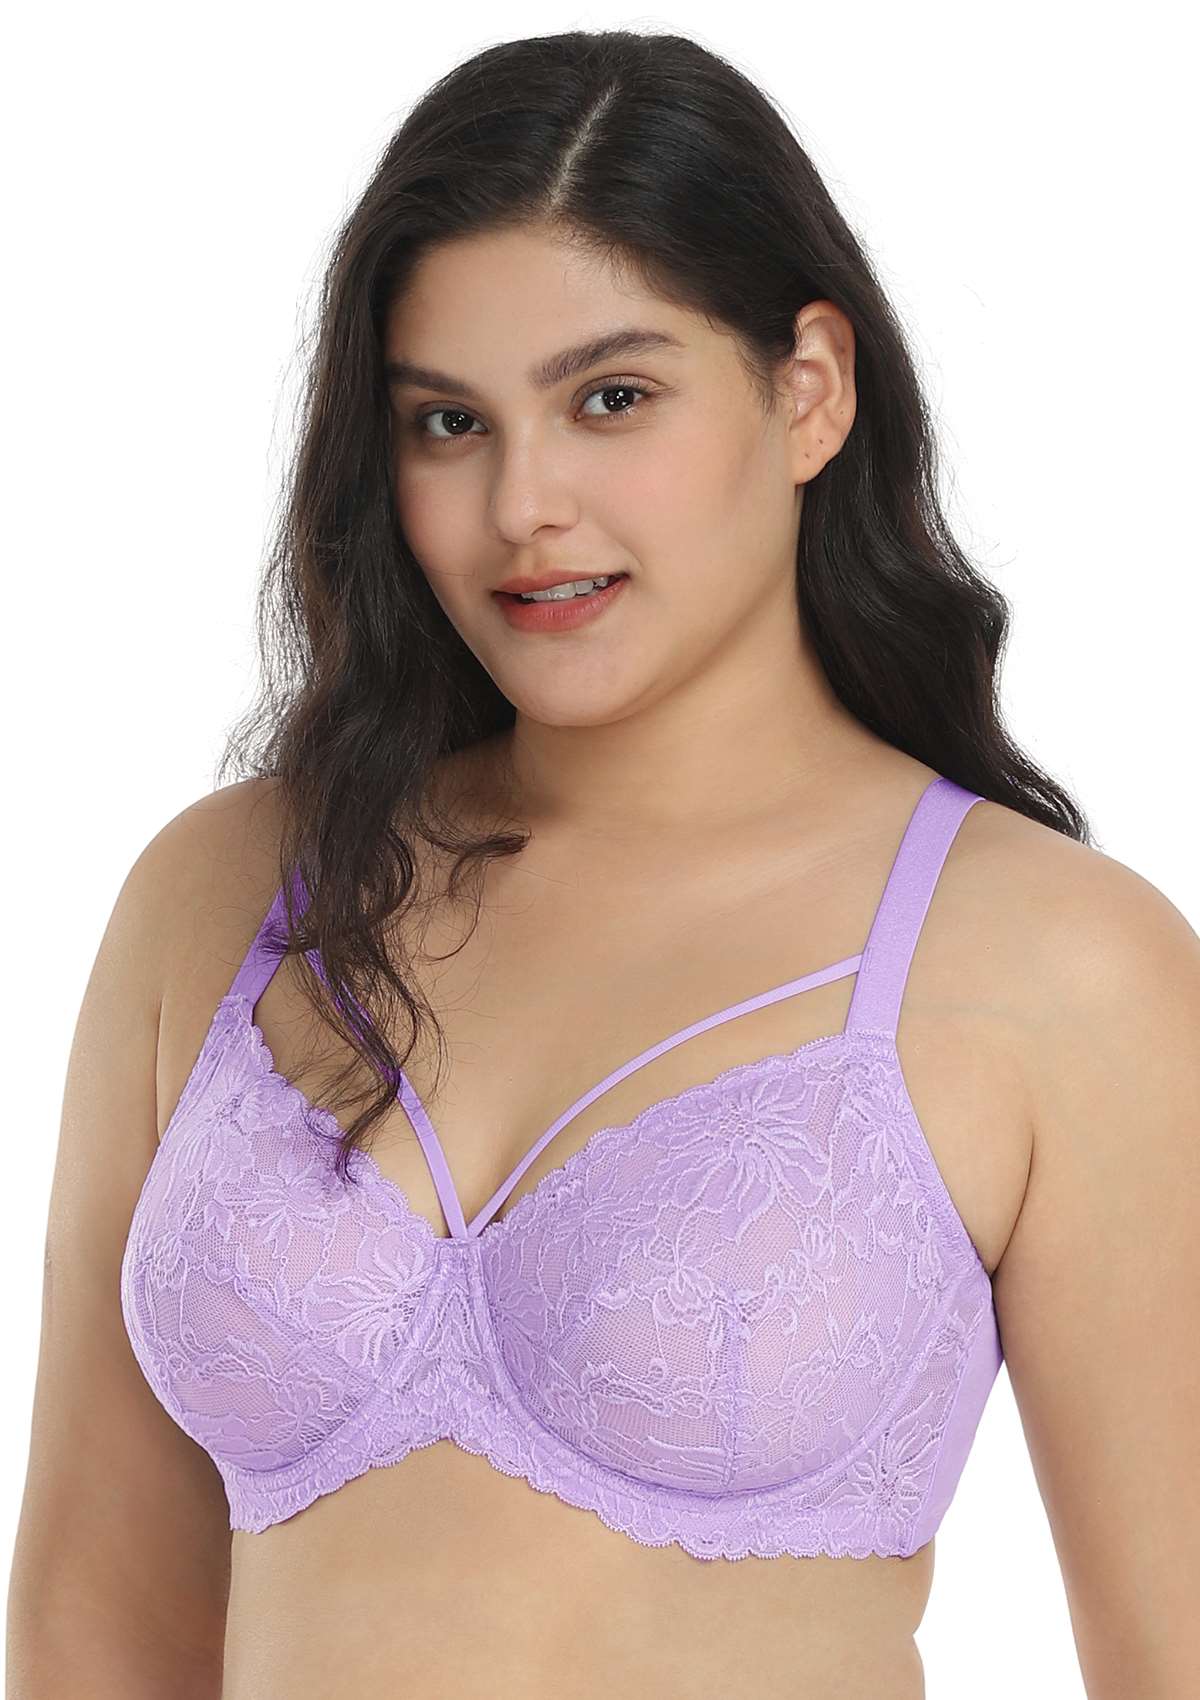 HSIA Pretty In Petals See-Through Lace Bra: Lift And Separate - Purple / 44 / D